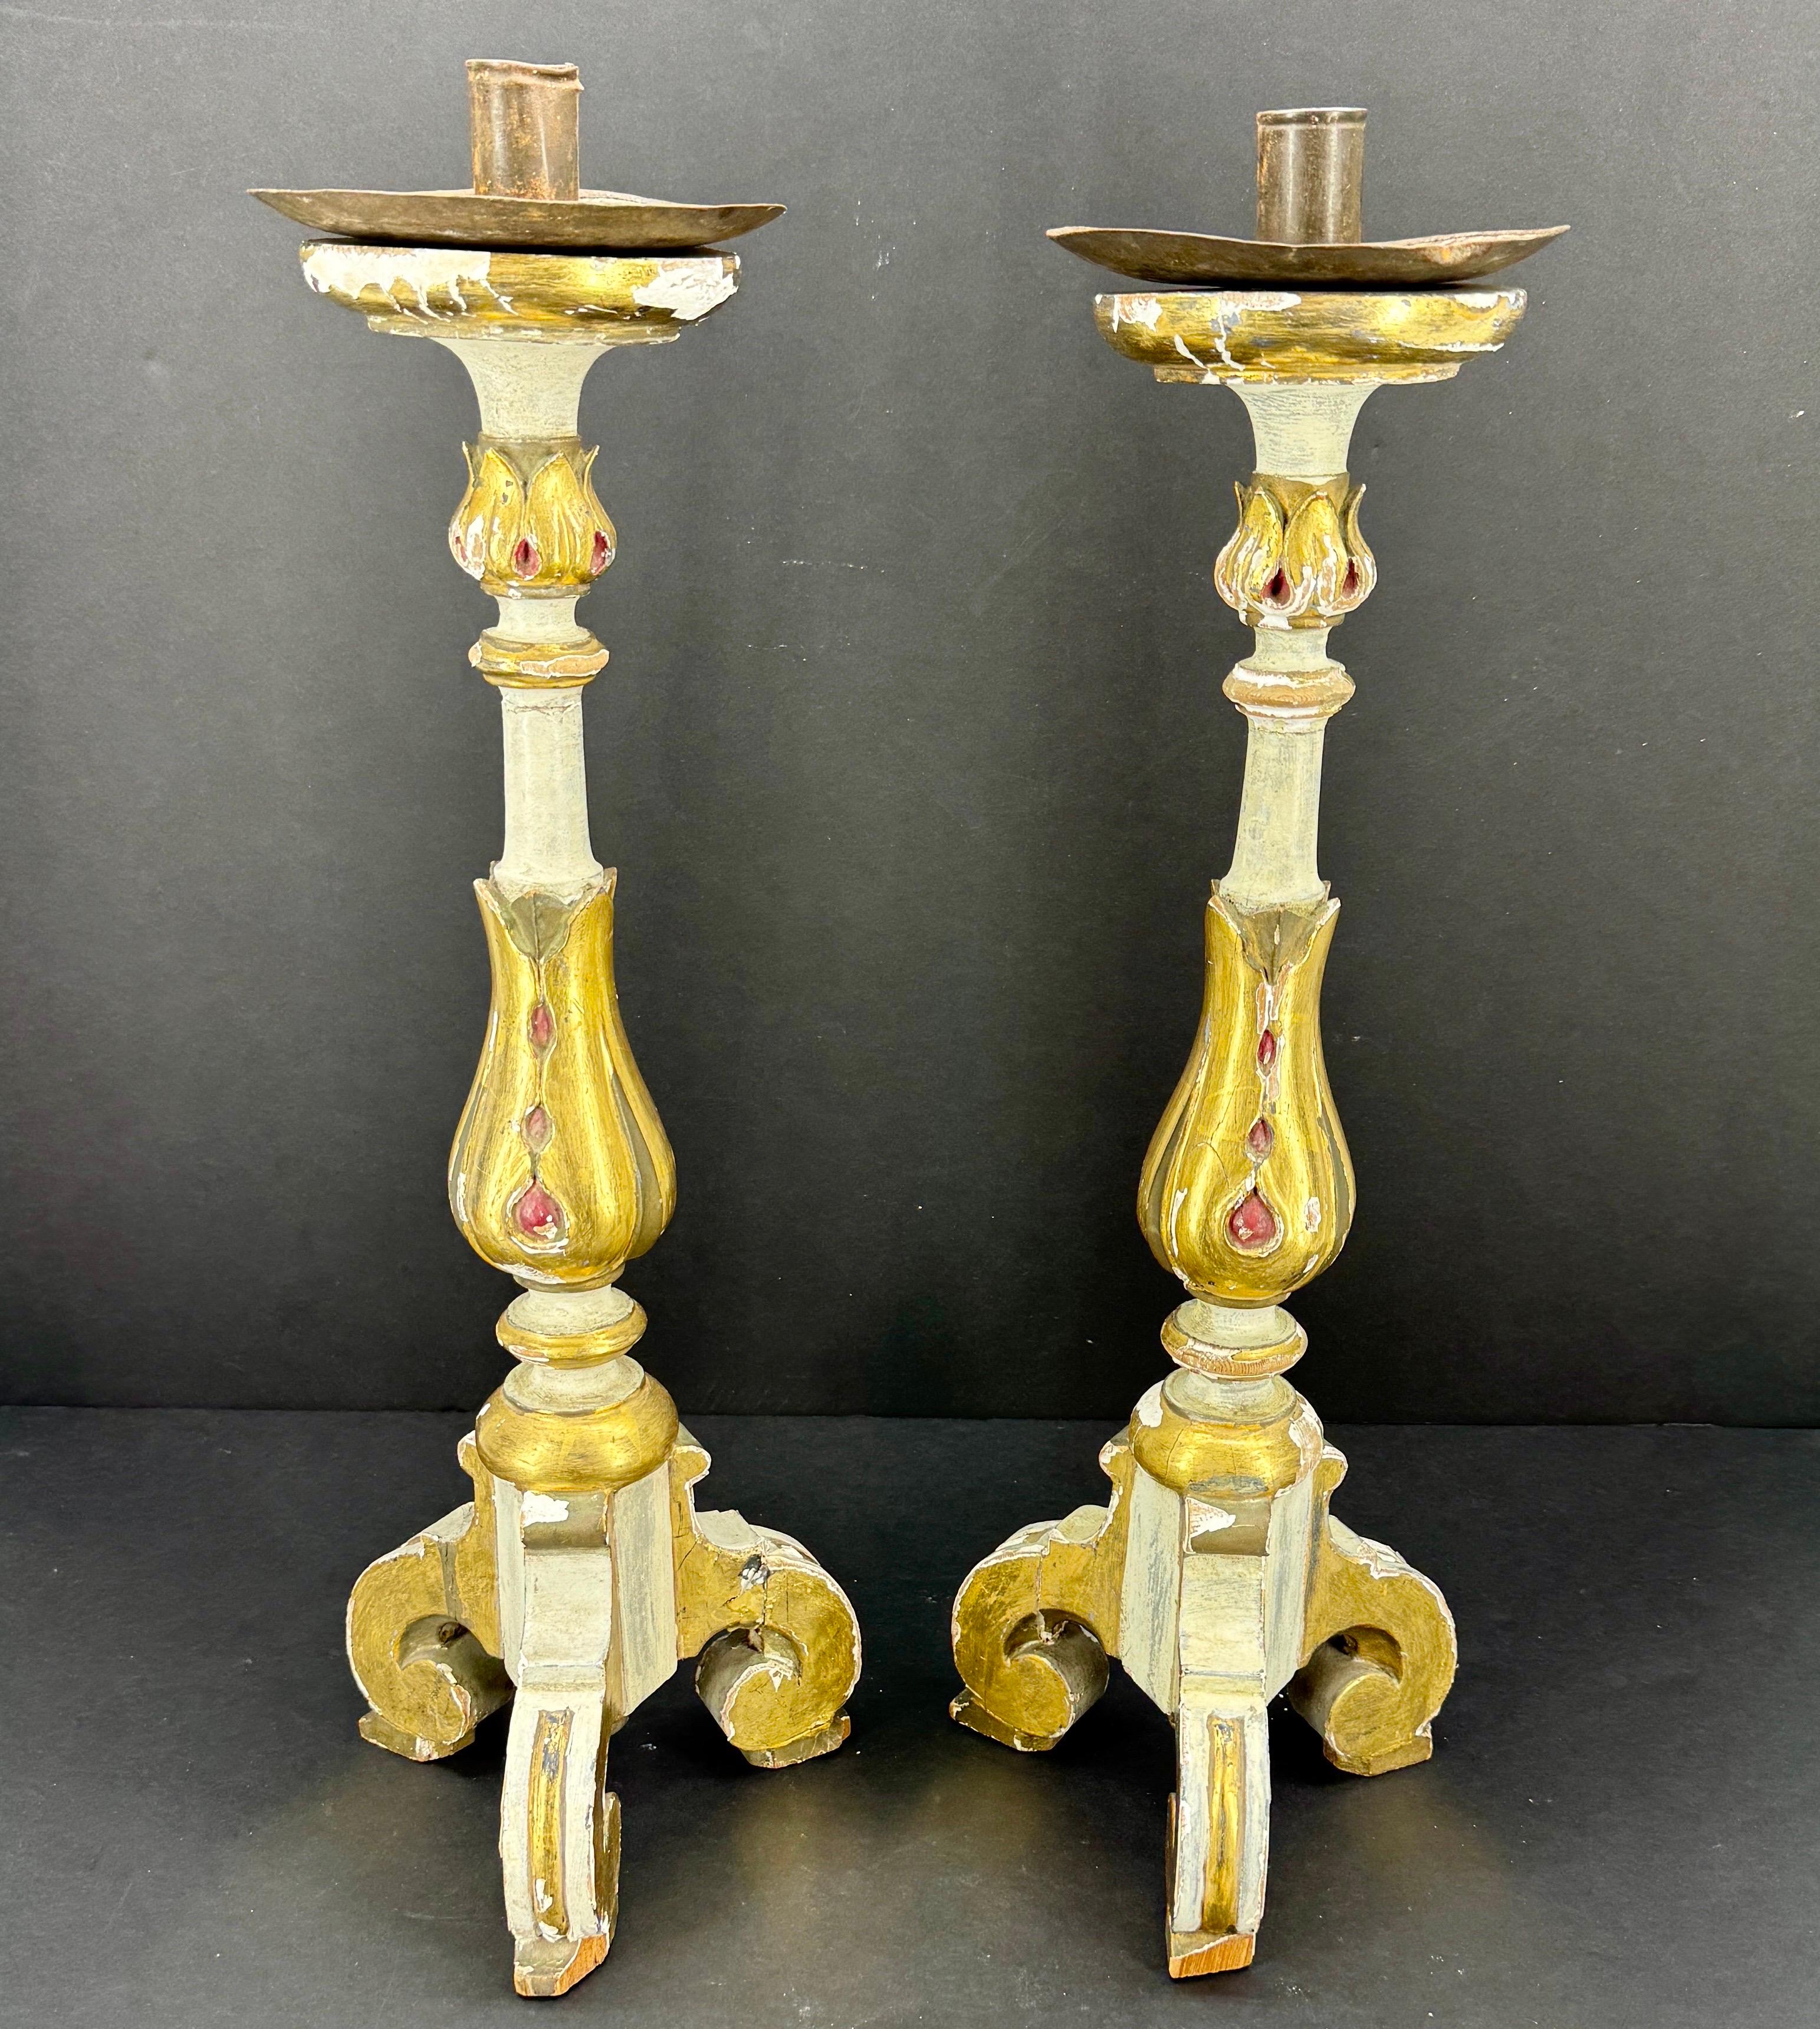 Hand-Crafted Pair of Italian Gilded Alter Candlesticks With Original Paint, 1930's For Sale